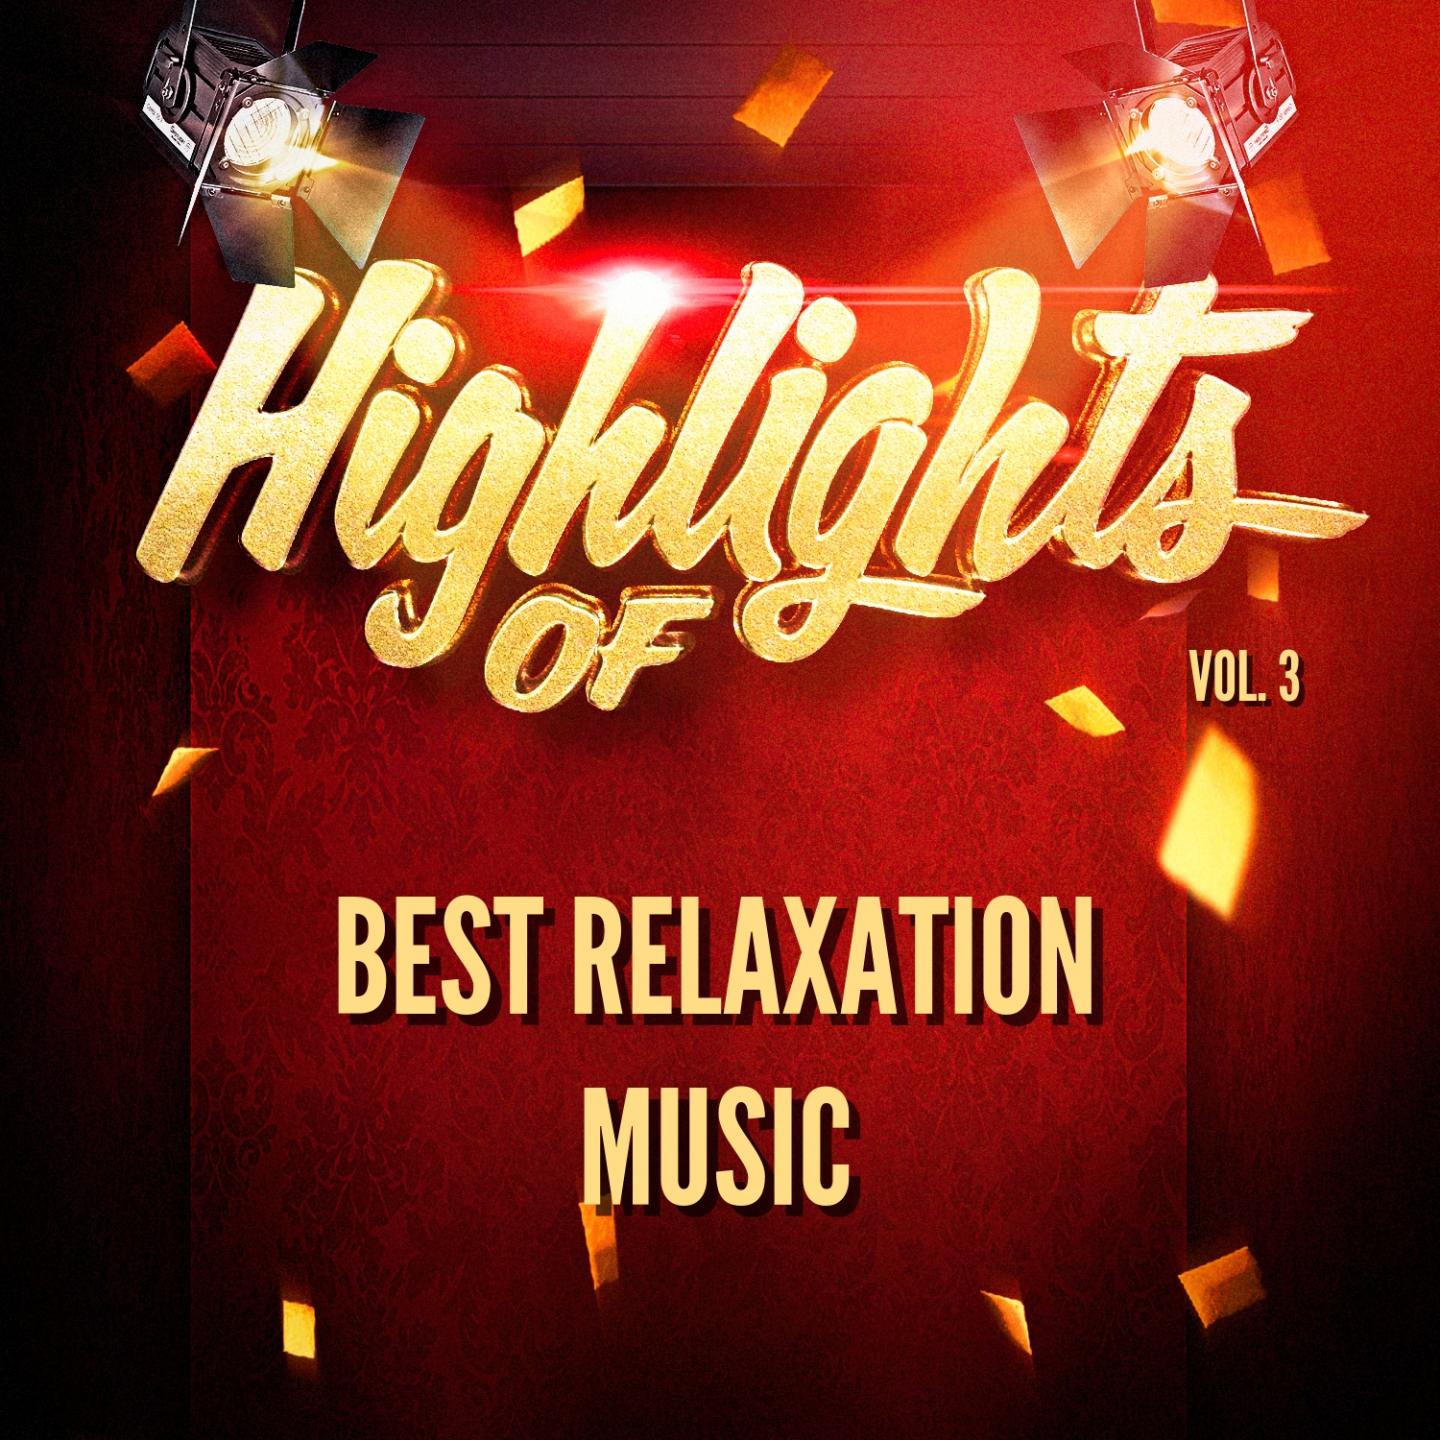 Highlights of Best Relaxation Music, Vol. 3